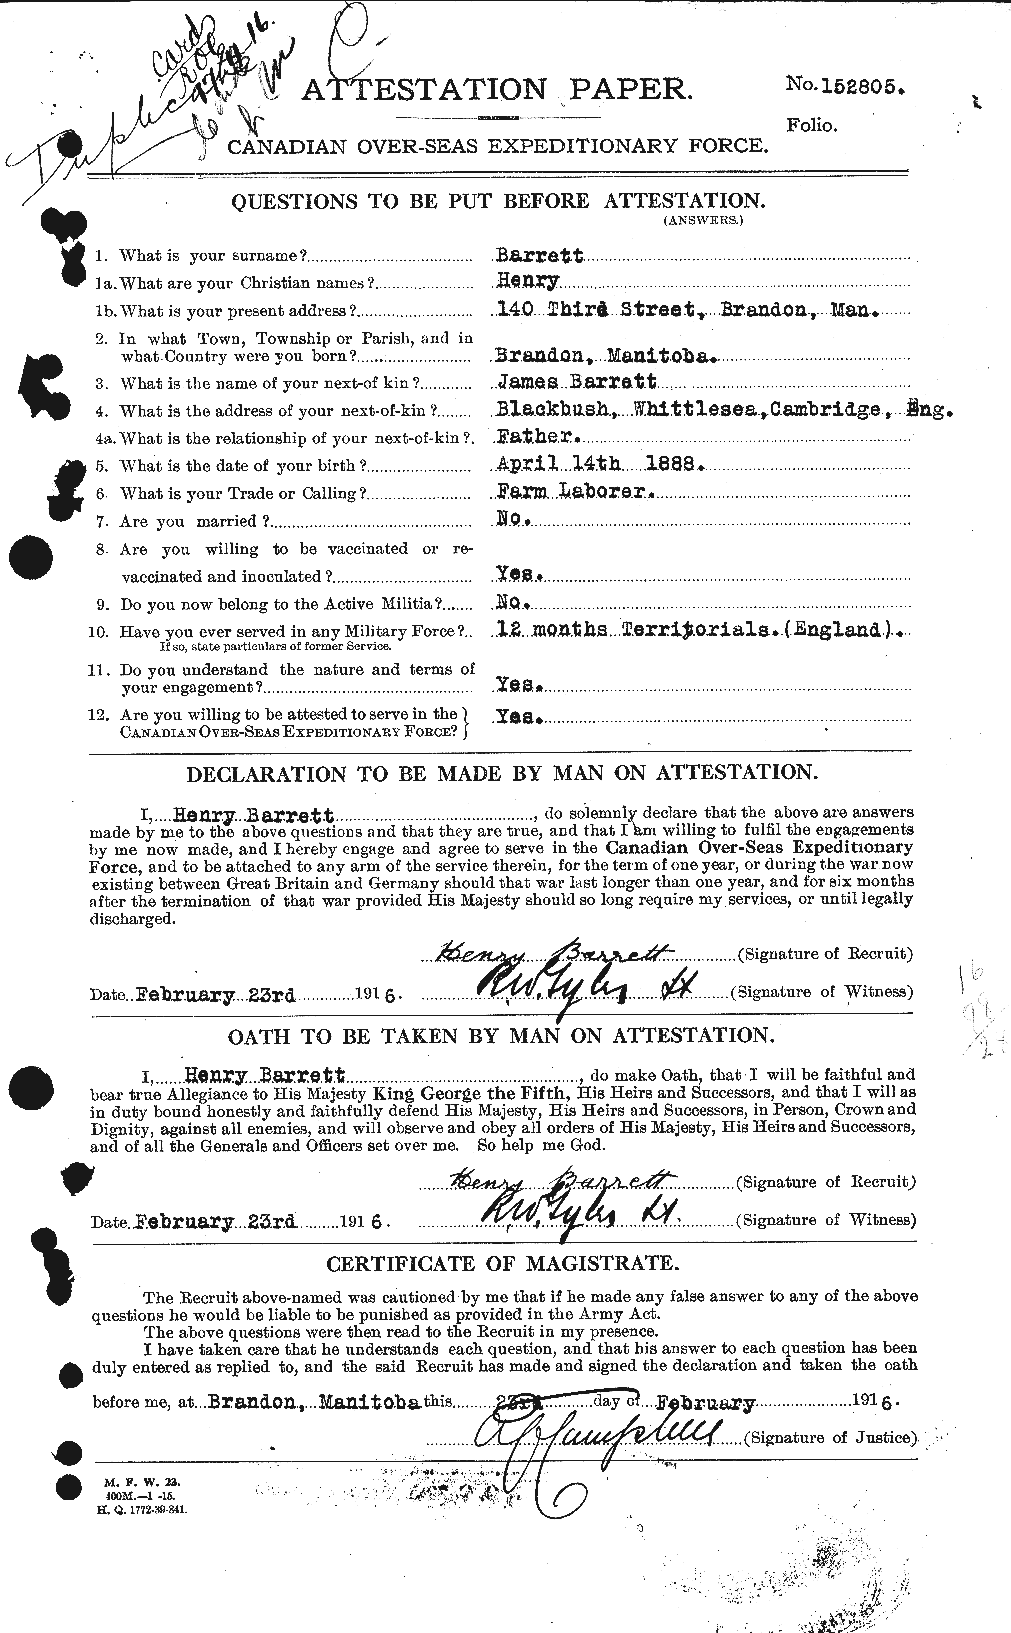 Personnel Records of the First World War - CEF 220283a